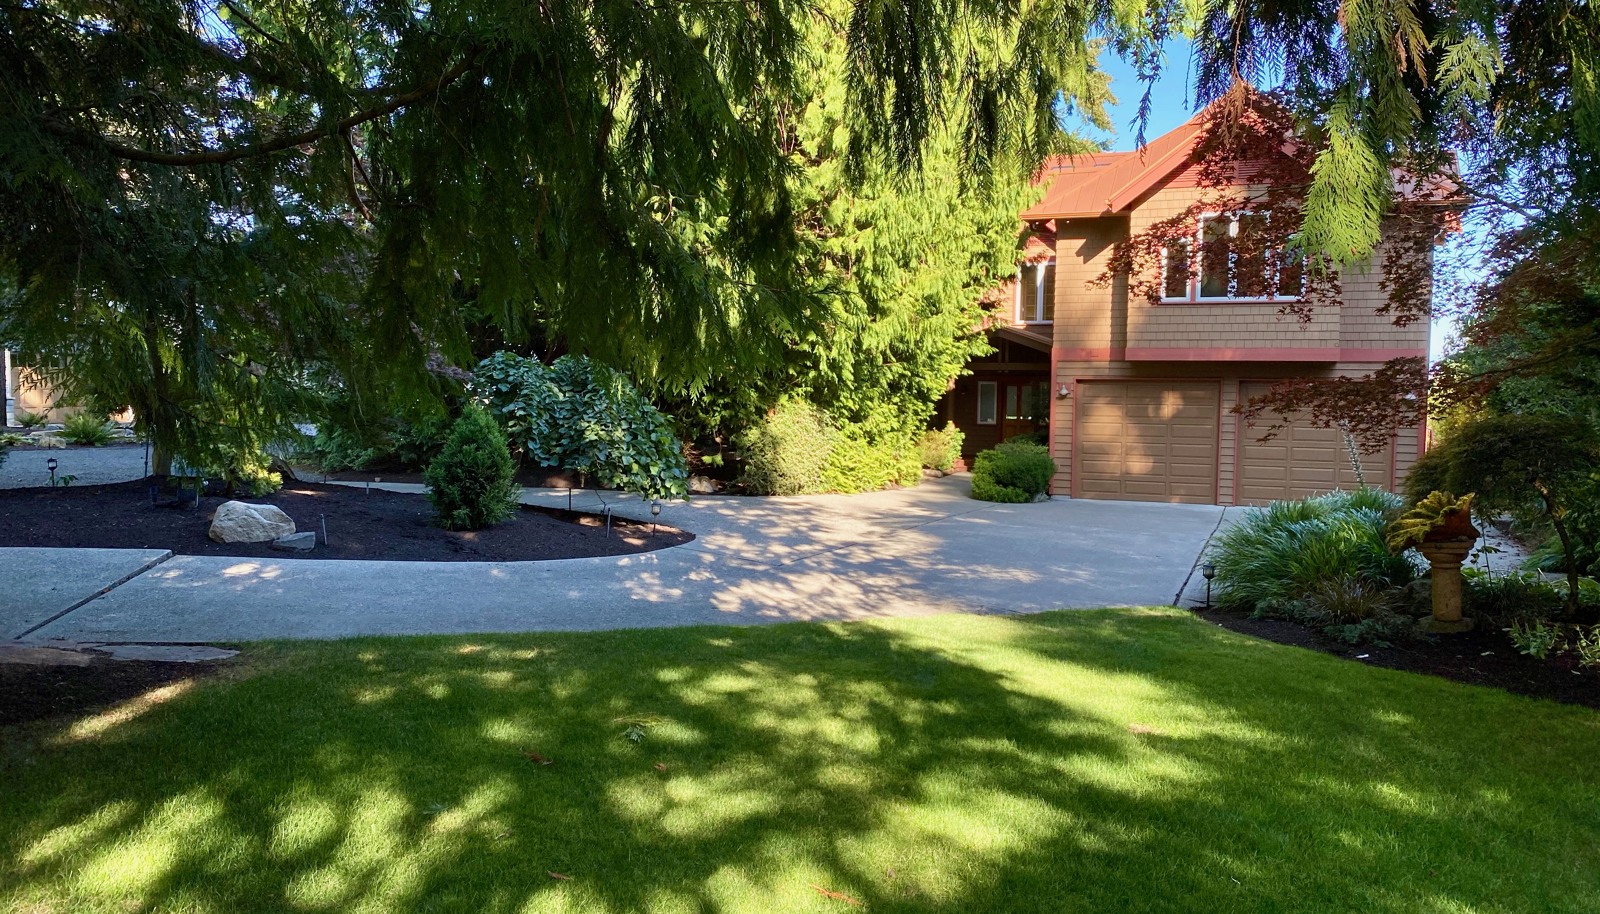 A serene setting with cedar trees, lawns and gardens. Convenience with a paved circular drive. The cottage is just to the left.